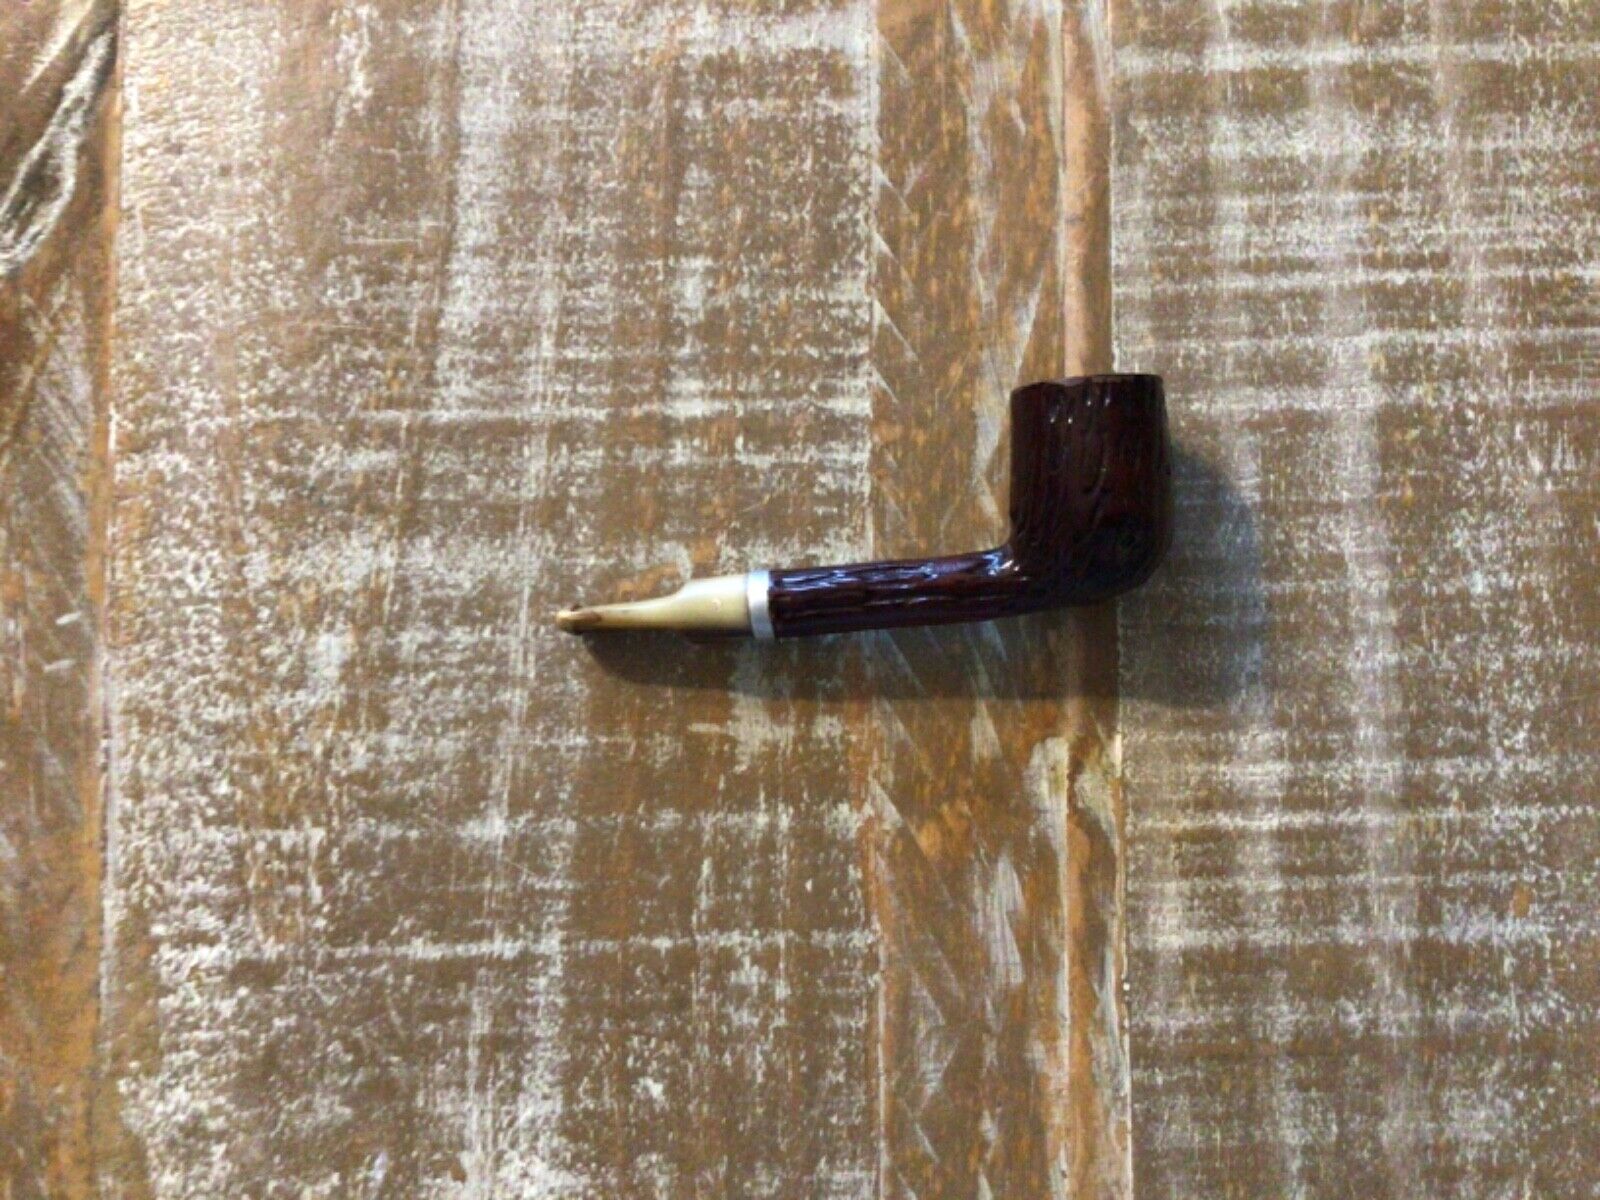 Beautiful Vintage Calabresi Pipe made in Italy from imported Mediterranean Briar